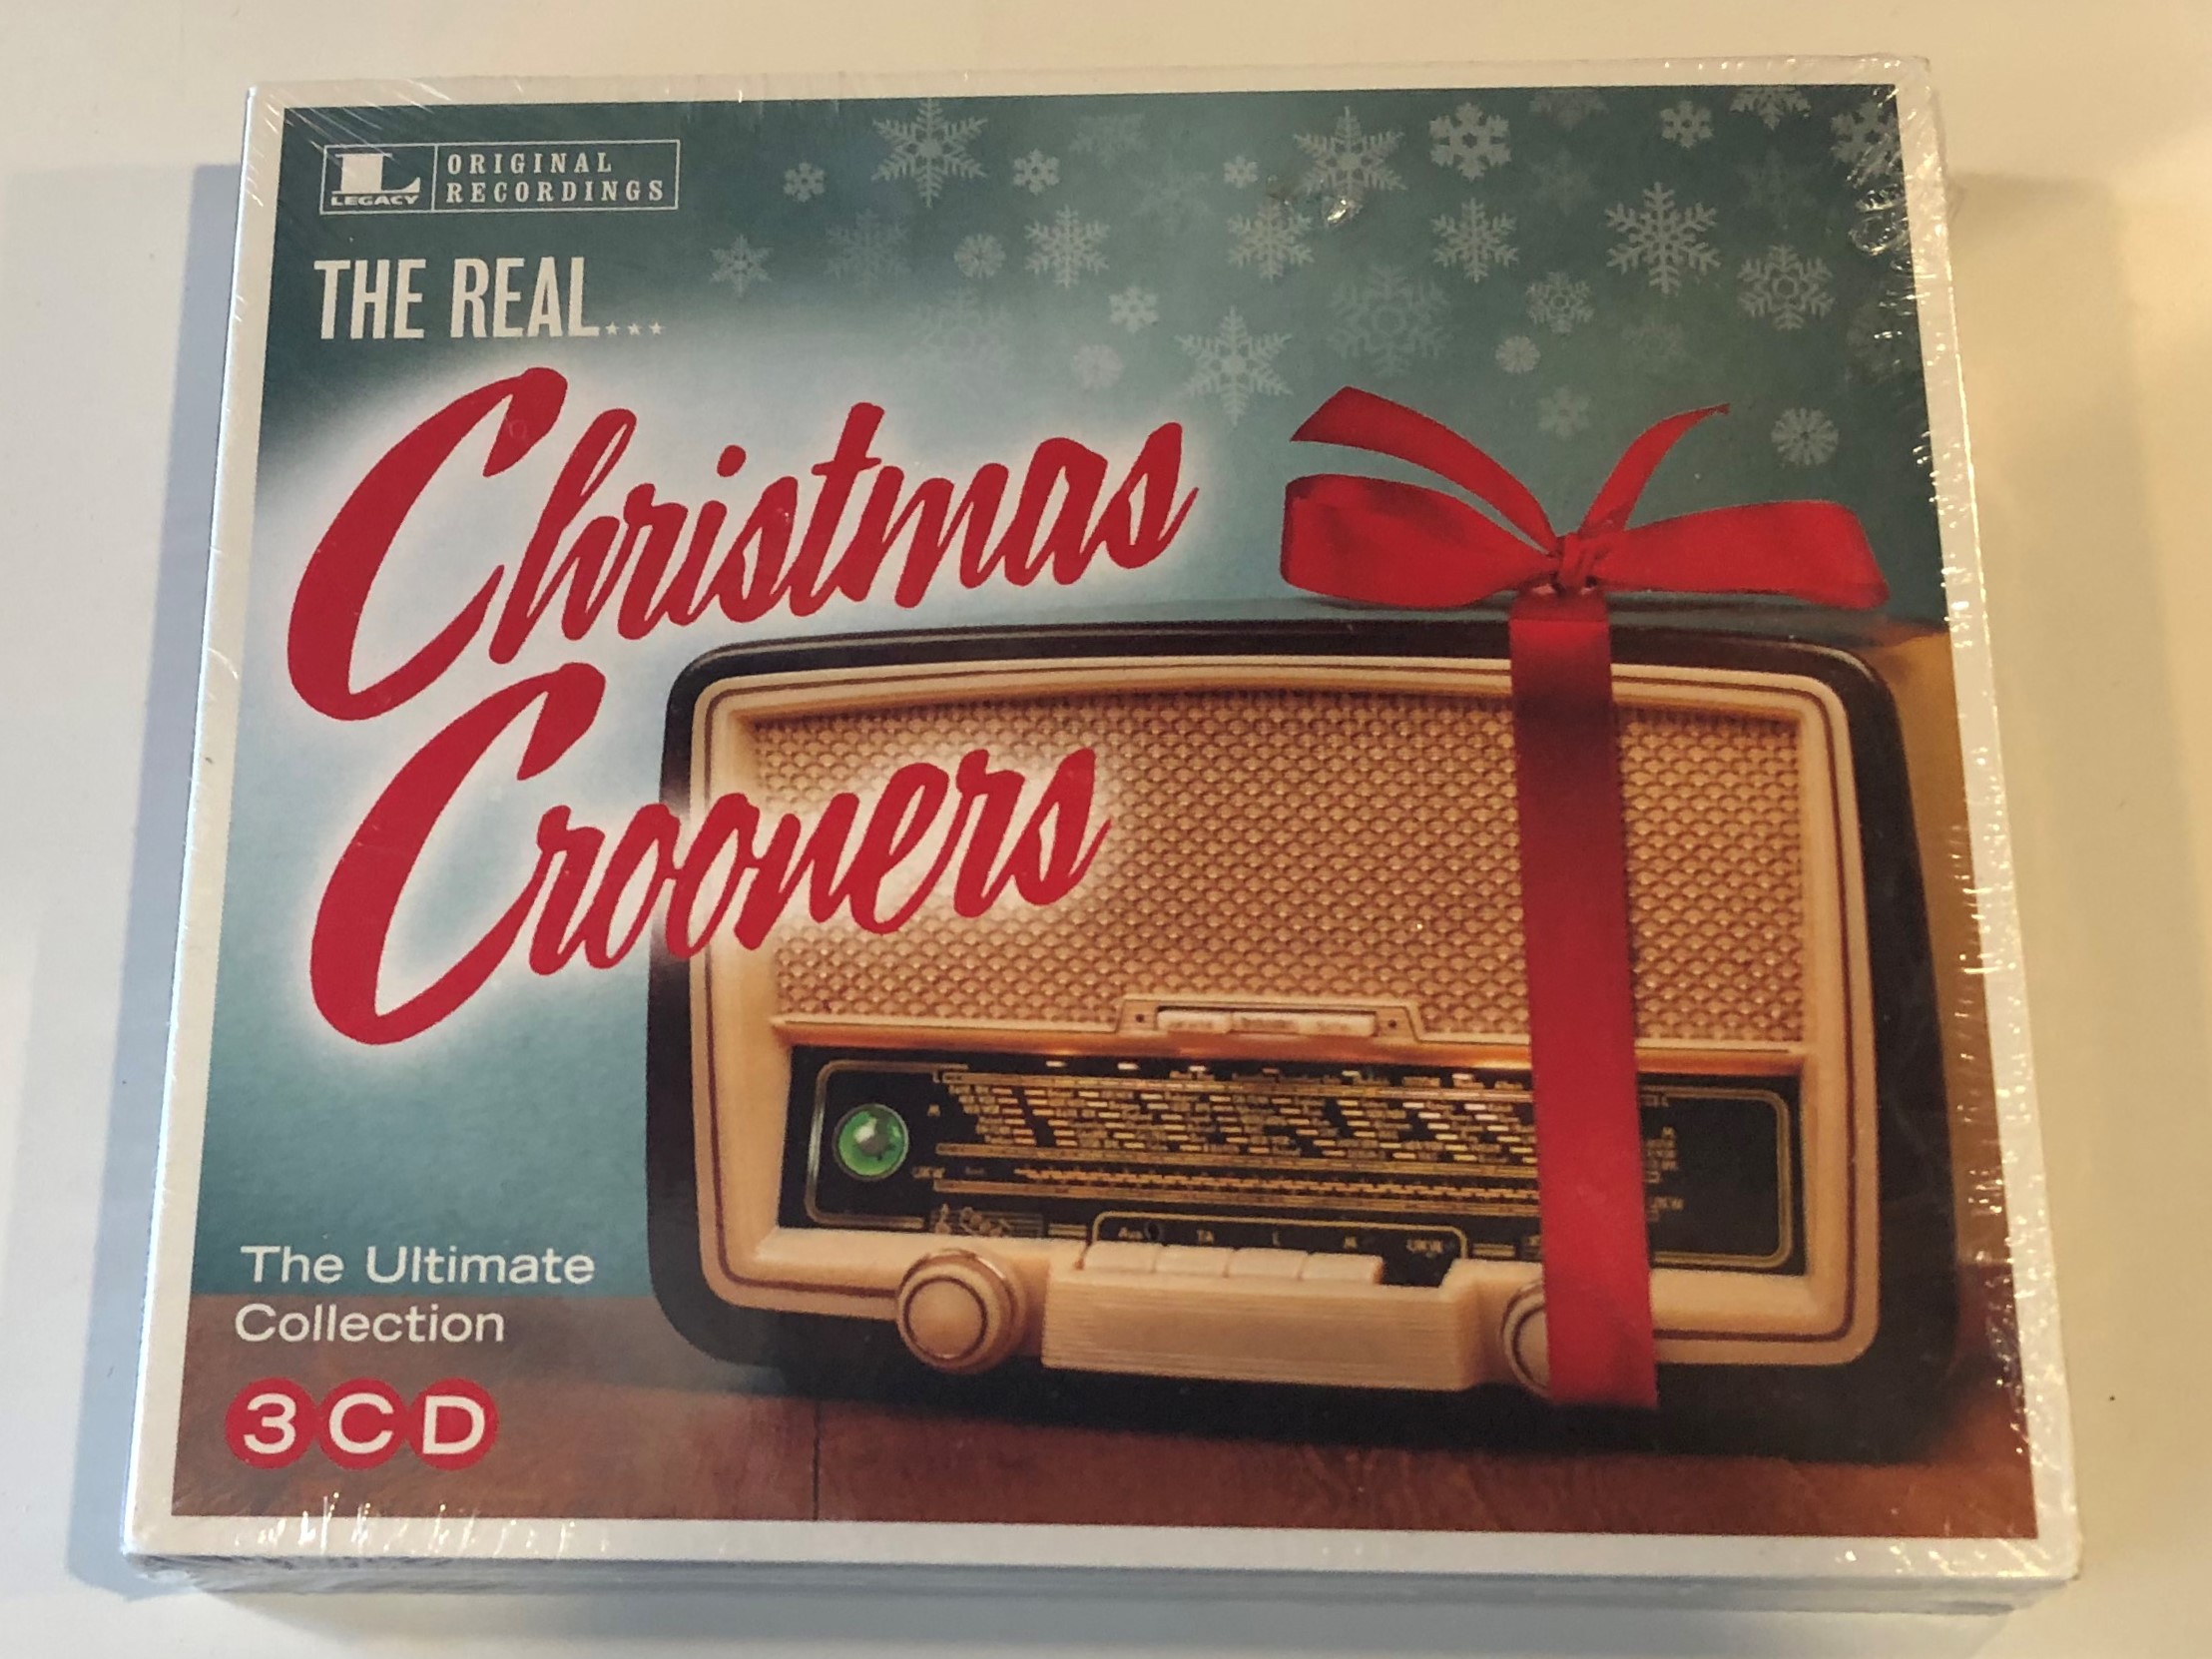 the-real...-christmas-crooners-the-ultimate-collection-sony-music-3x-audio-cd-2016-88985373252-1-.jpg